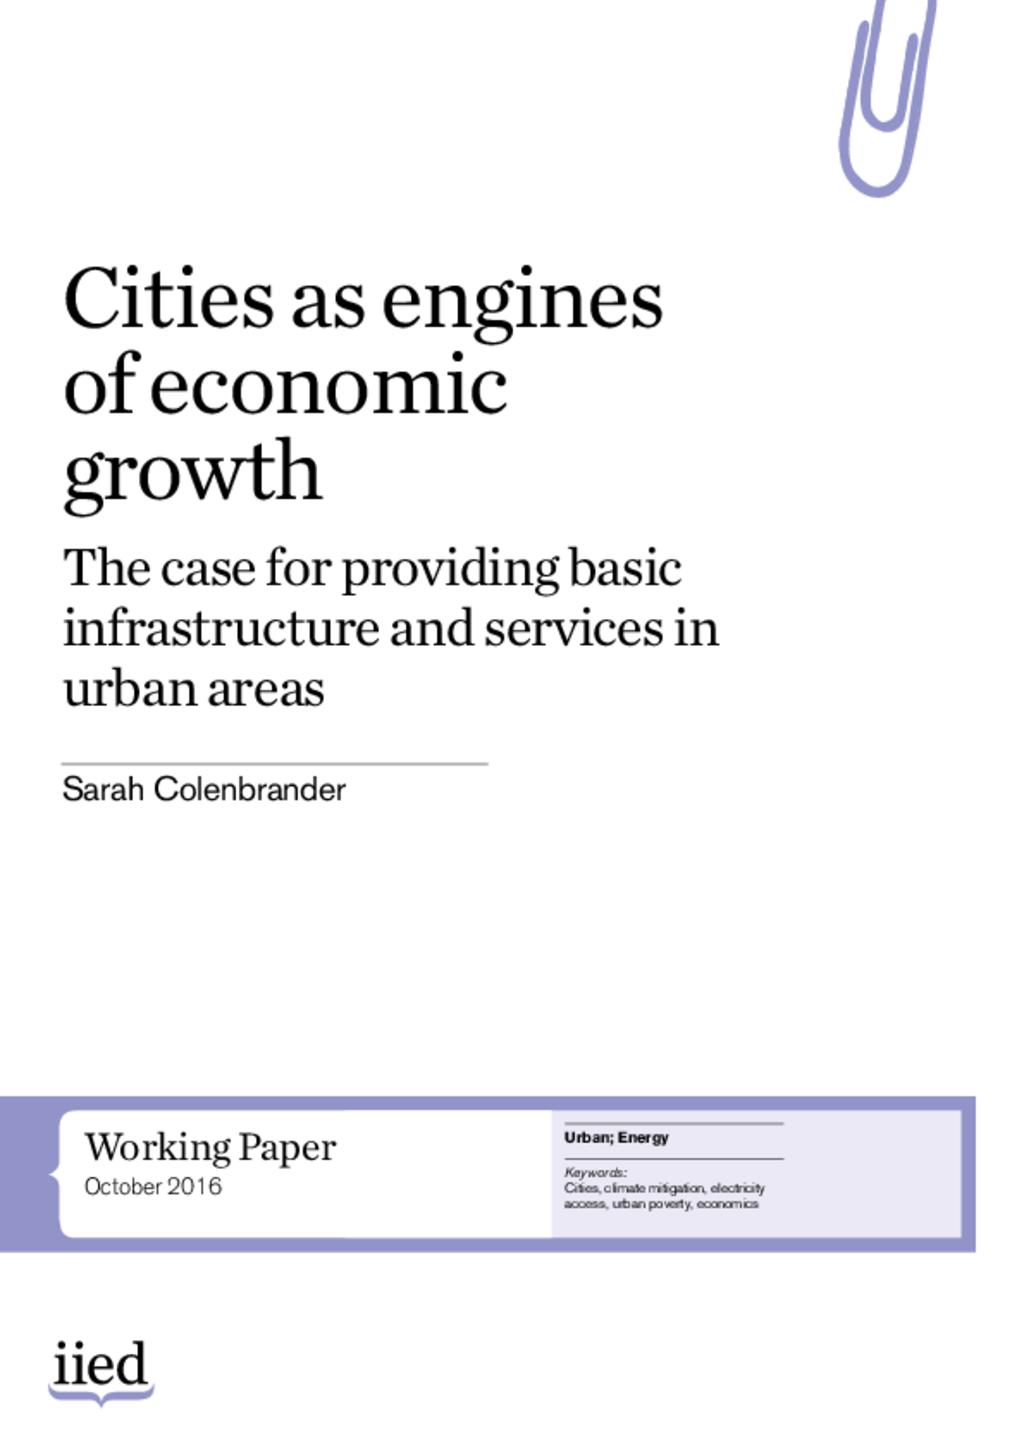 iied_ cities as engines of growth